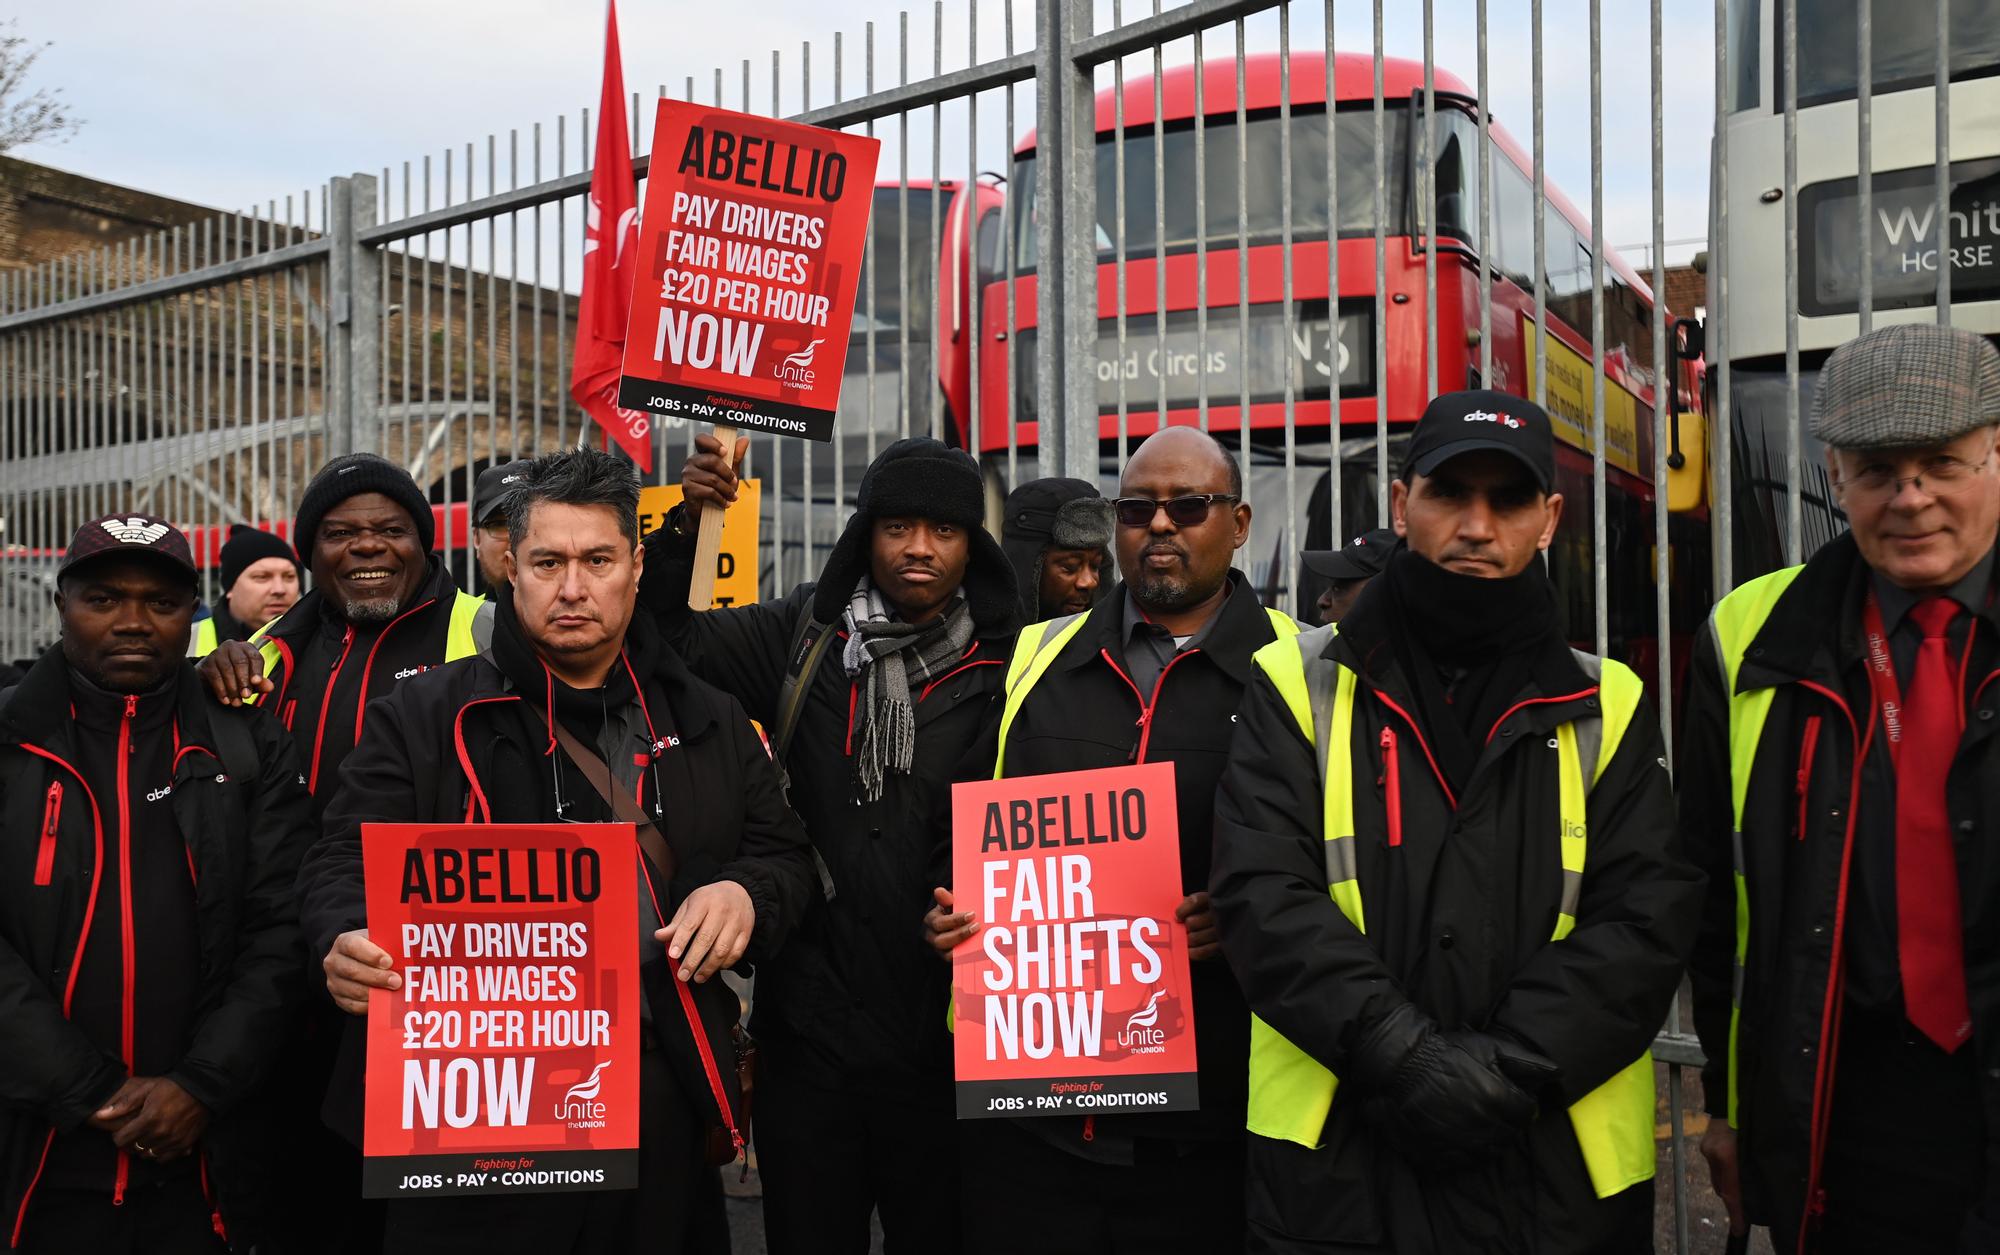 Bus workers strike over pay and working conditions